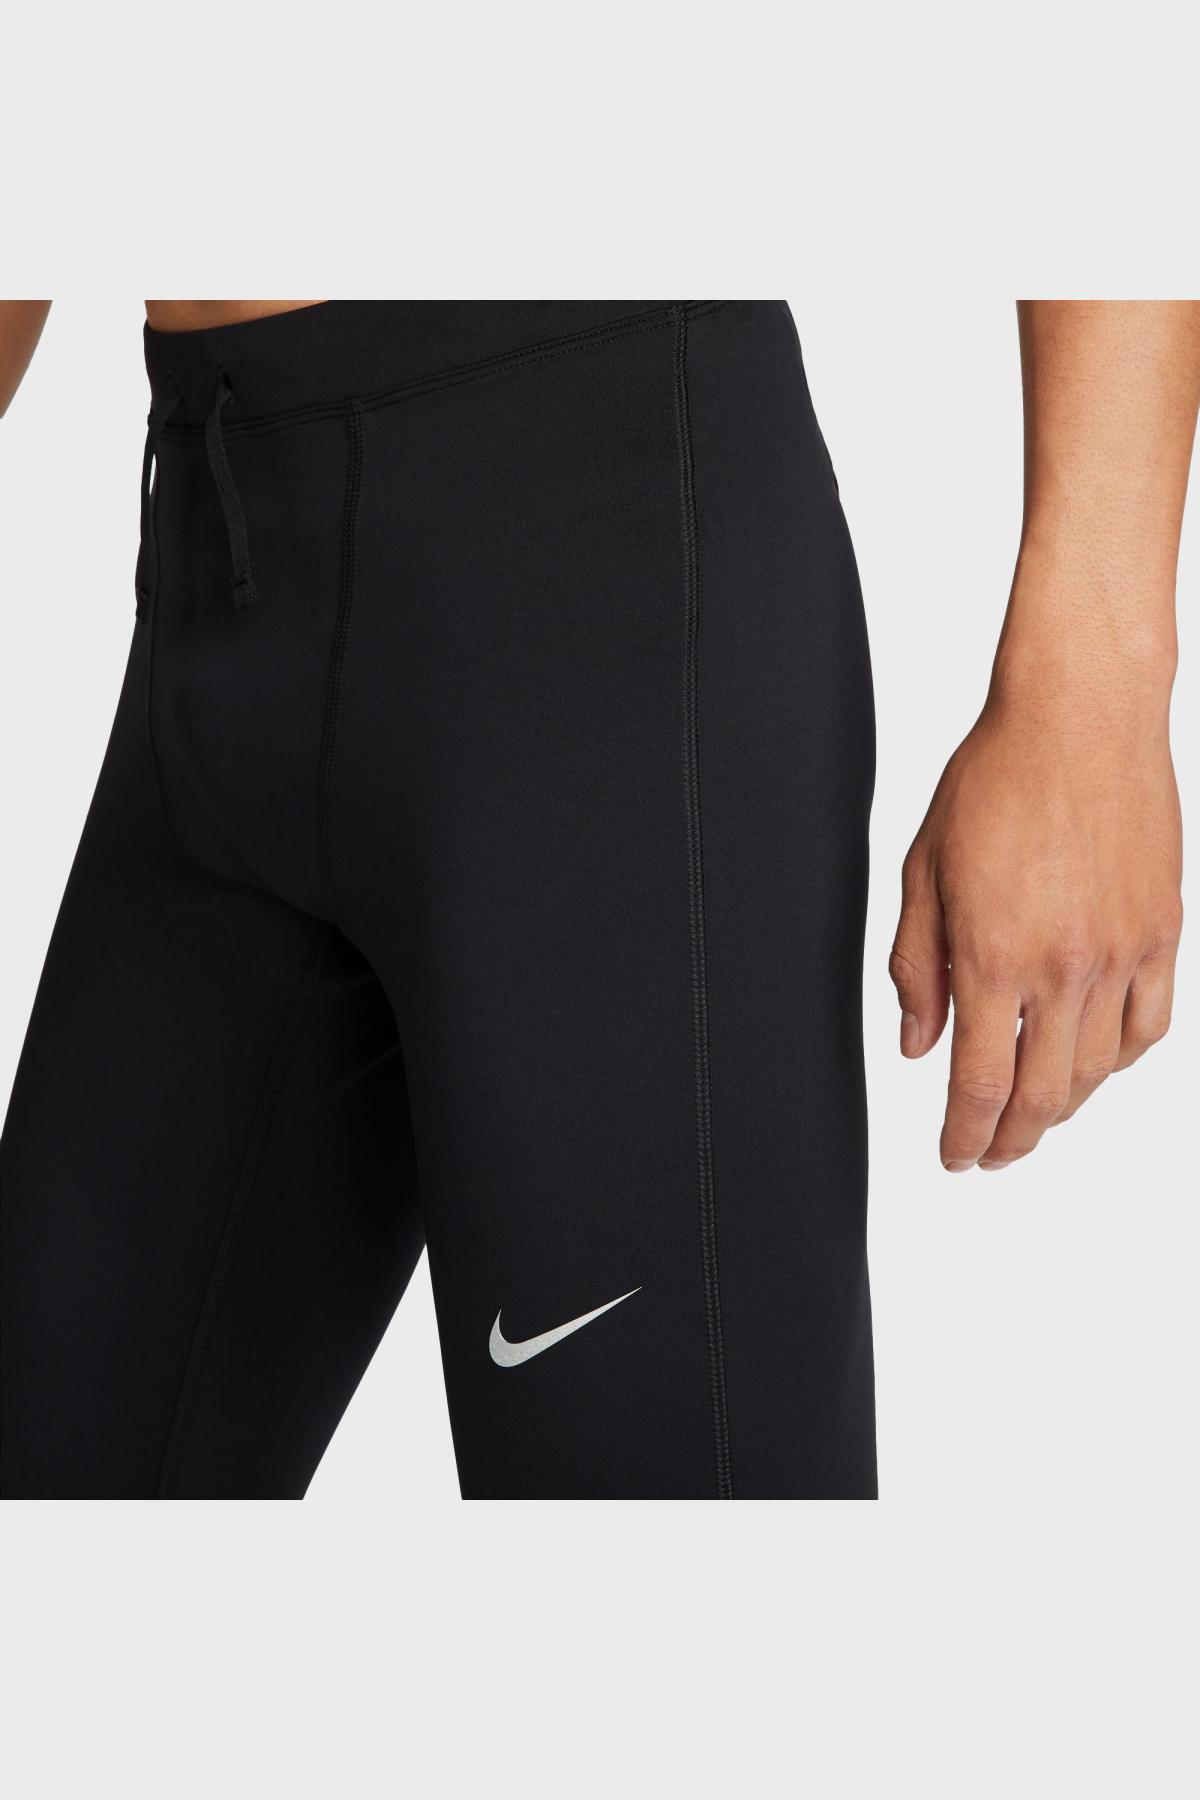 Nike - Challenger Tight